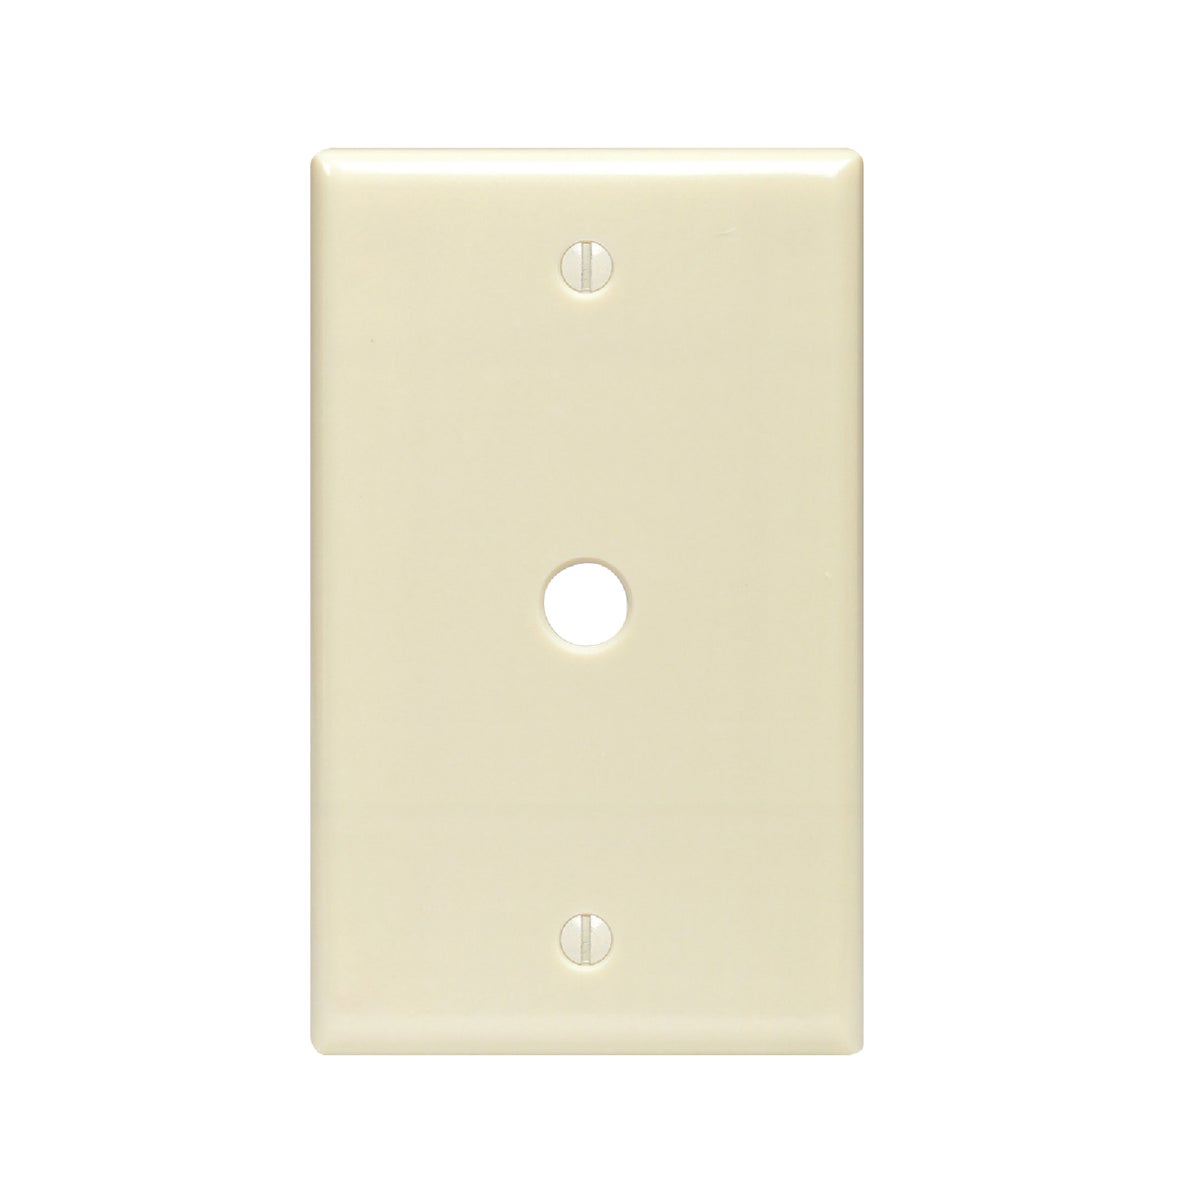 Item 511285, Standard size plastic telephone/cable wall plate. Box mount application. 0.